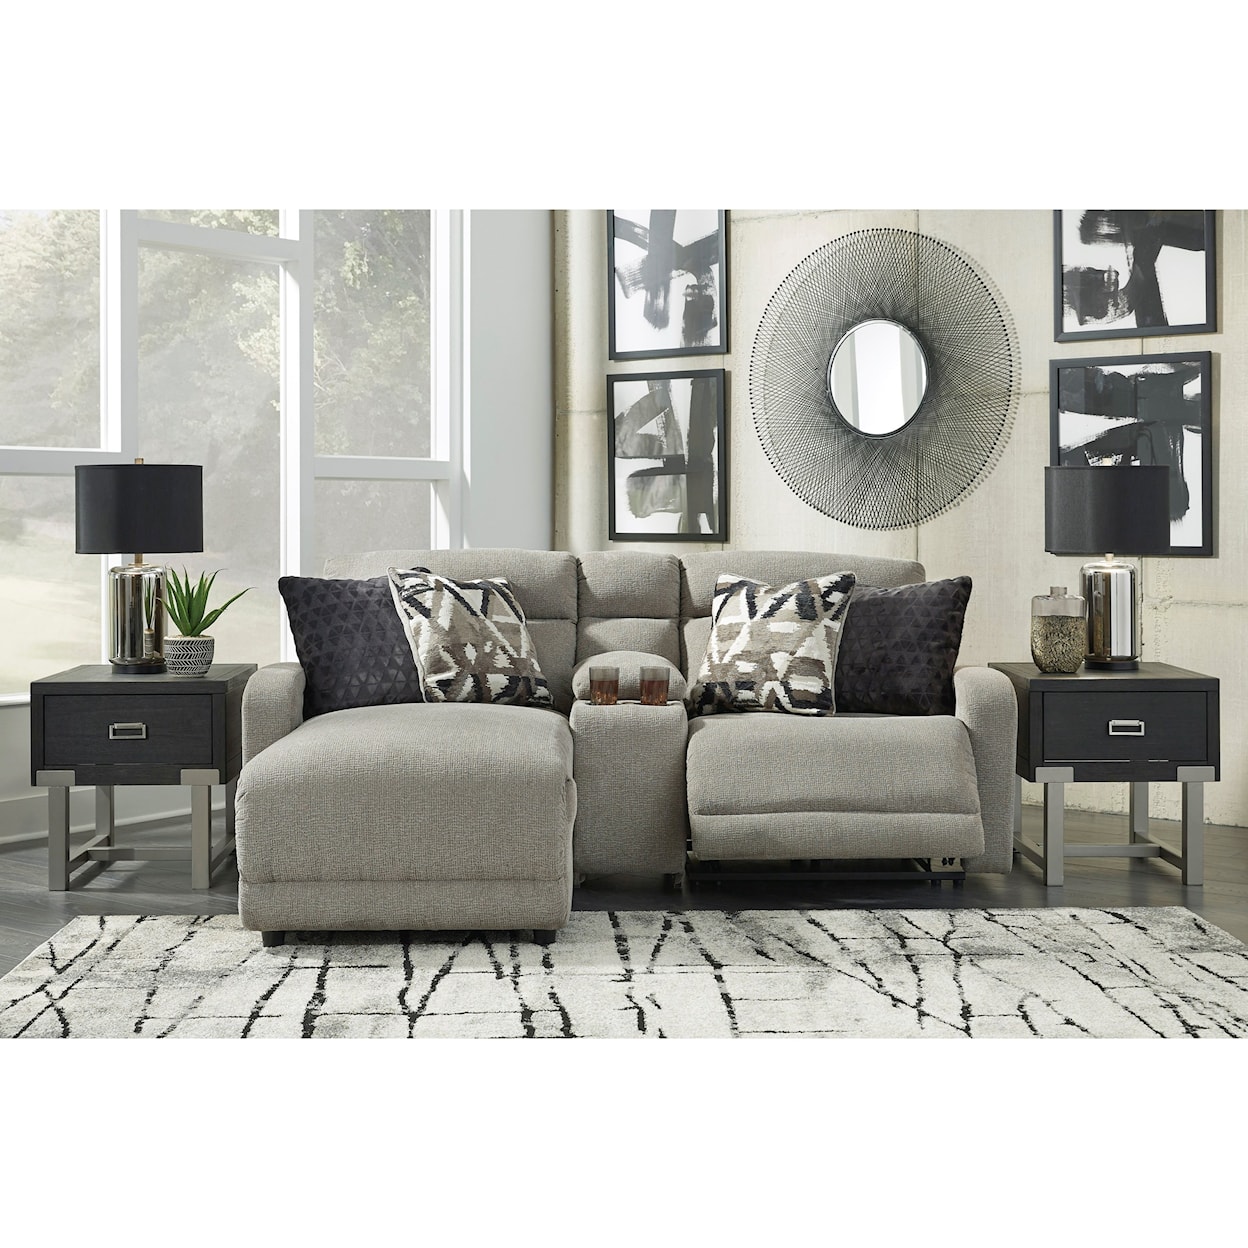 Michael Alan Select Colleyville 3-Piece Pwr Reclining Sectional with Chaise